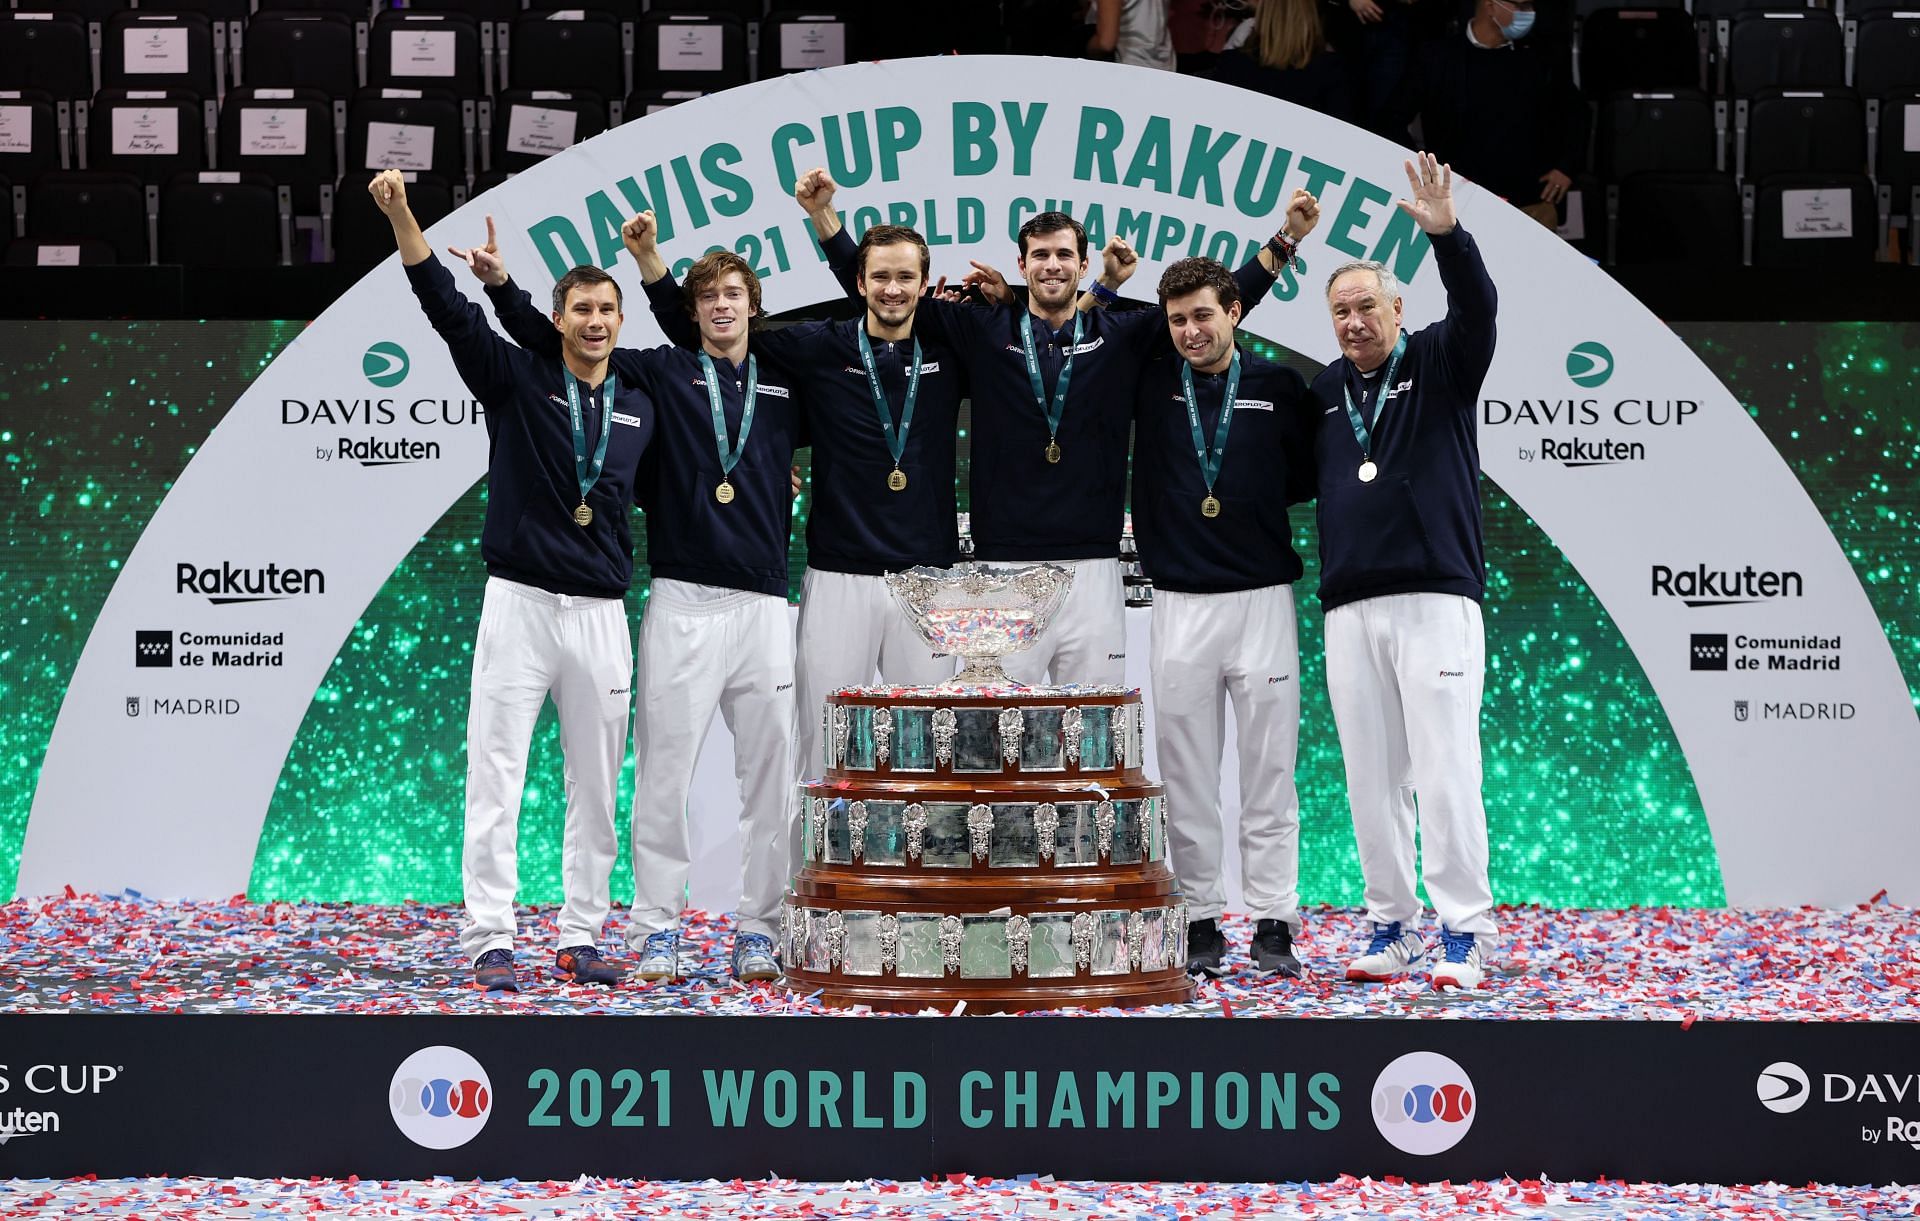 The Russian Tennis Federation team celebrates being crowned 2021 Davis Cup champions in Madrid